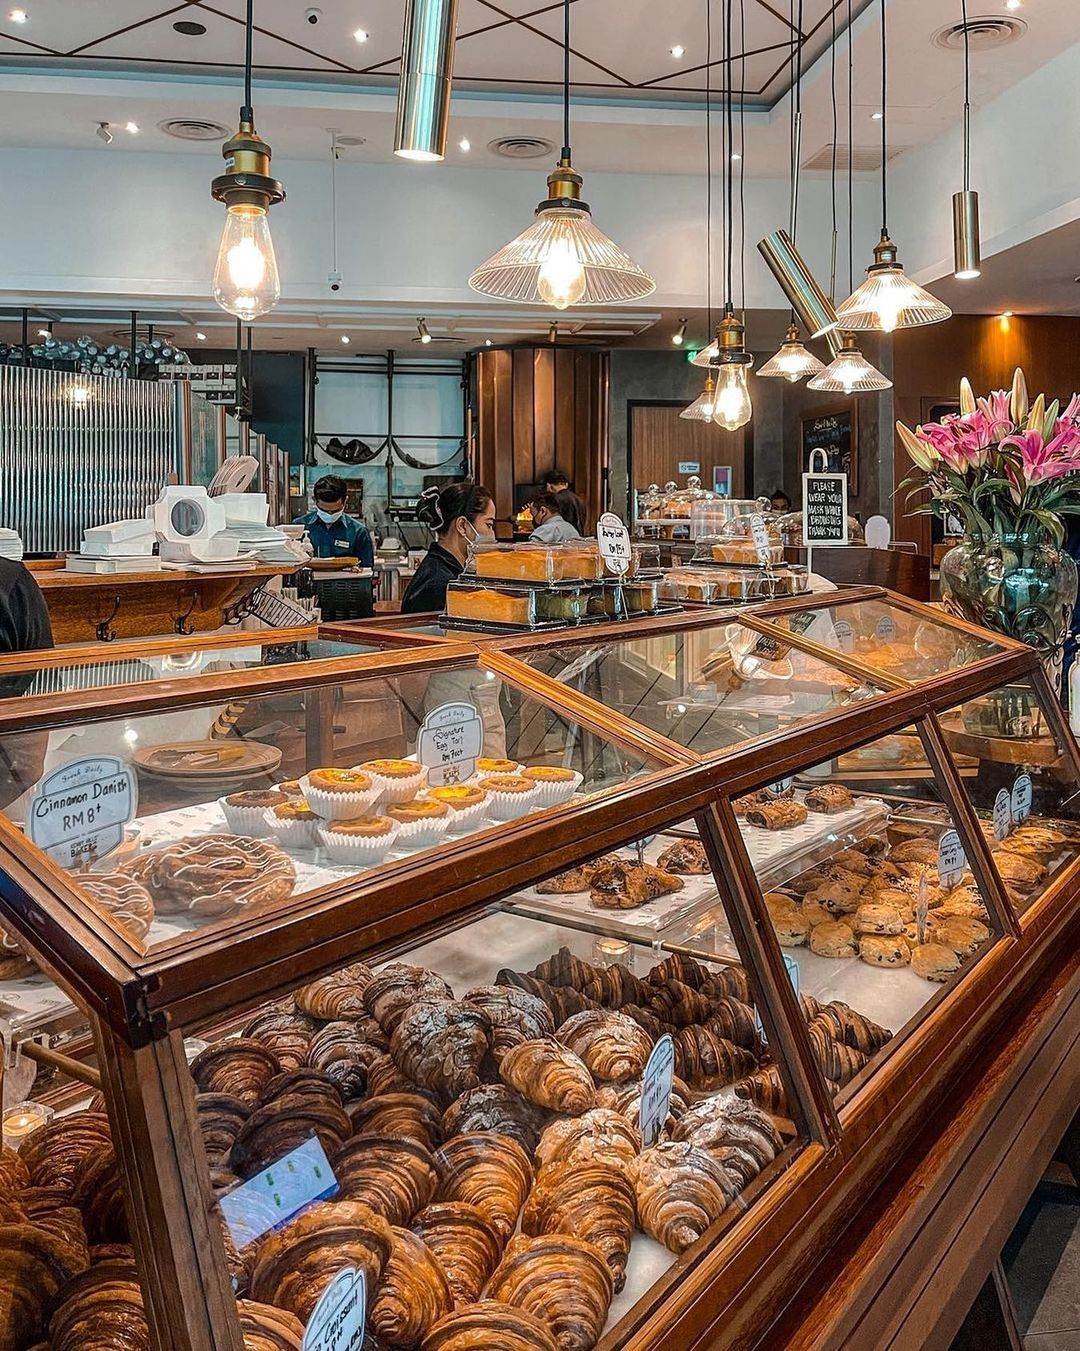 Bakeries in KL and PJ - Kenny Hills Bakers